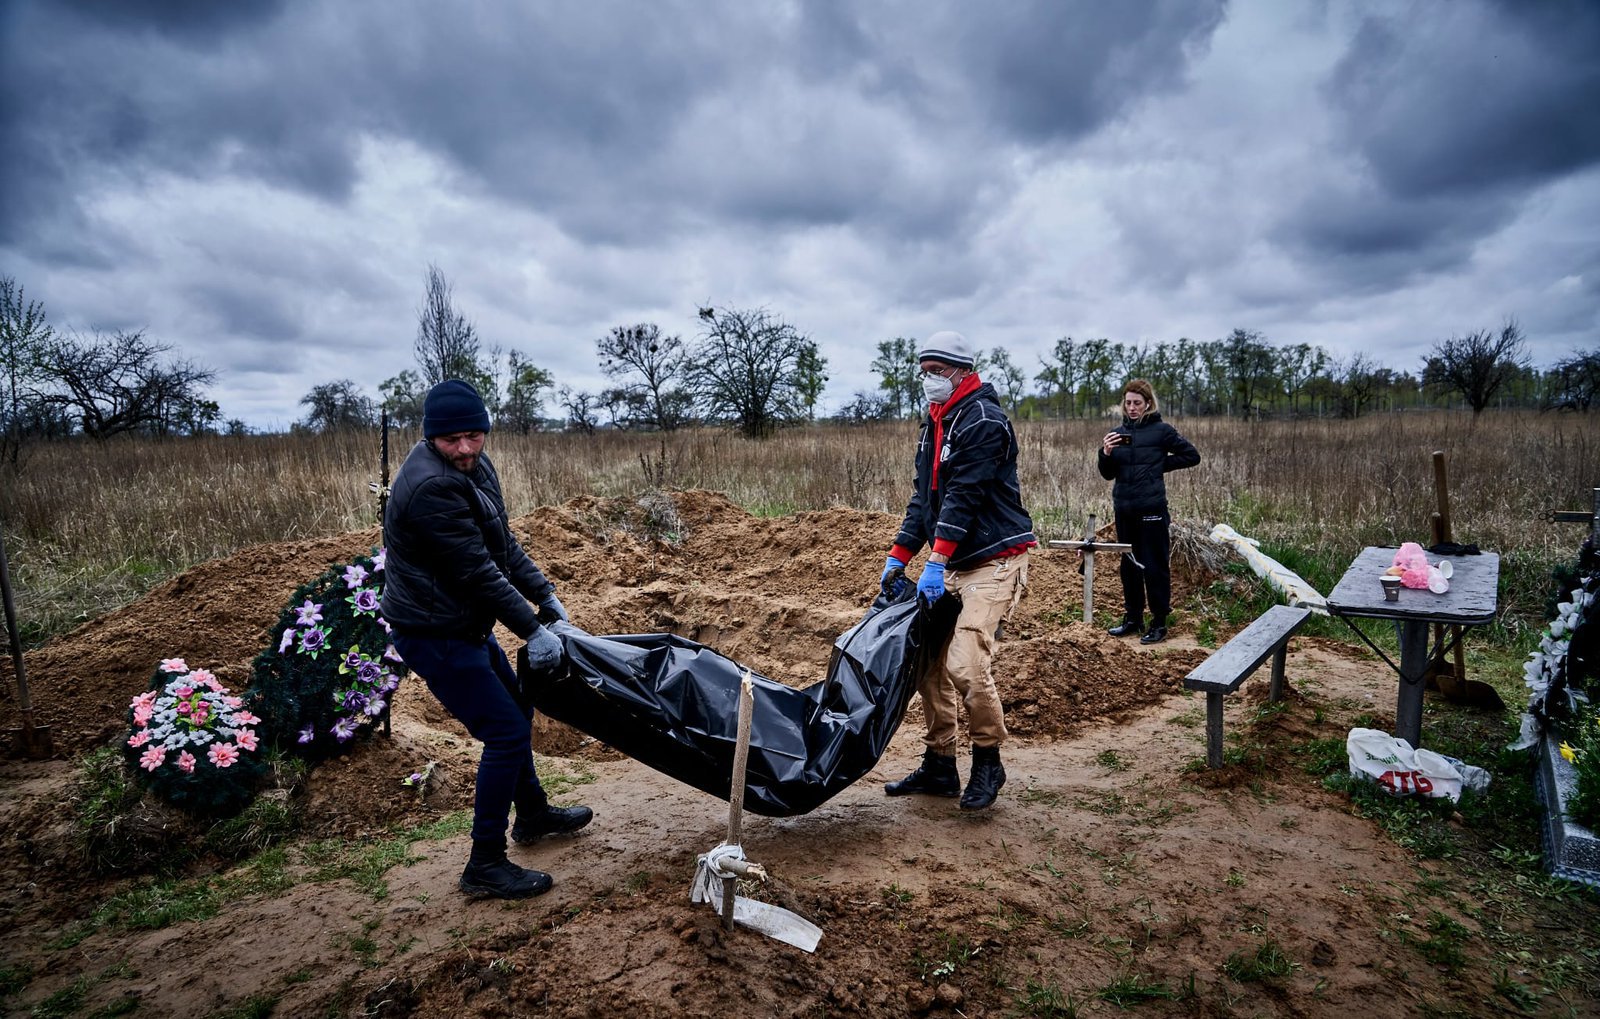 The volunteers of Cargo 200 mission are carrying a body from the grave to the vehicle to take it to the morgue